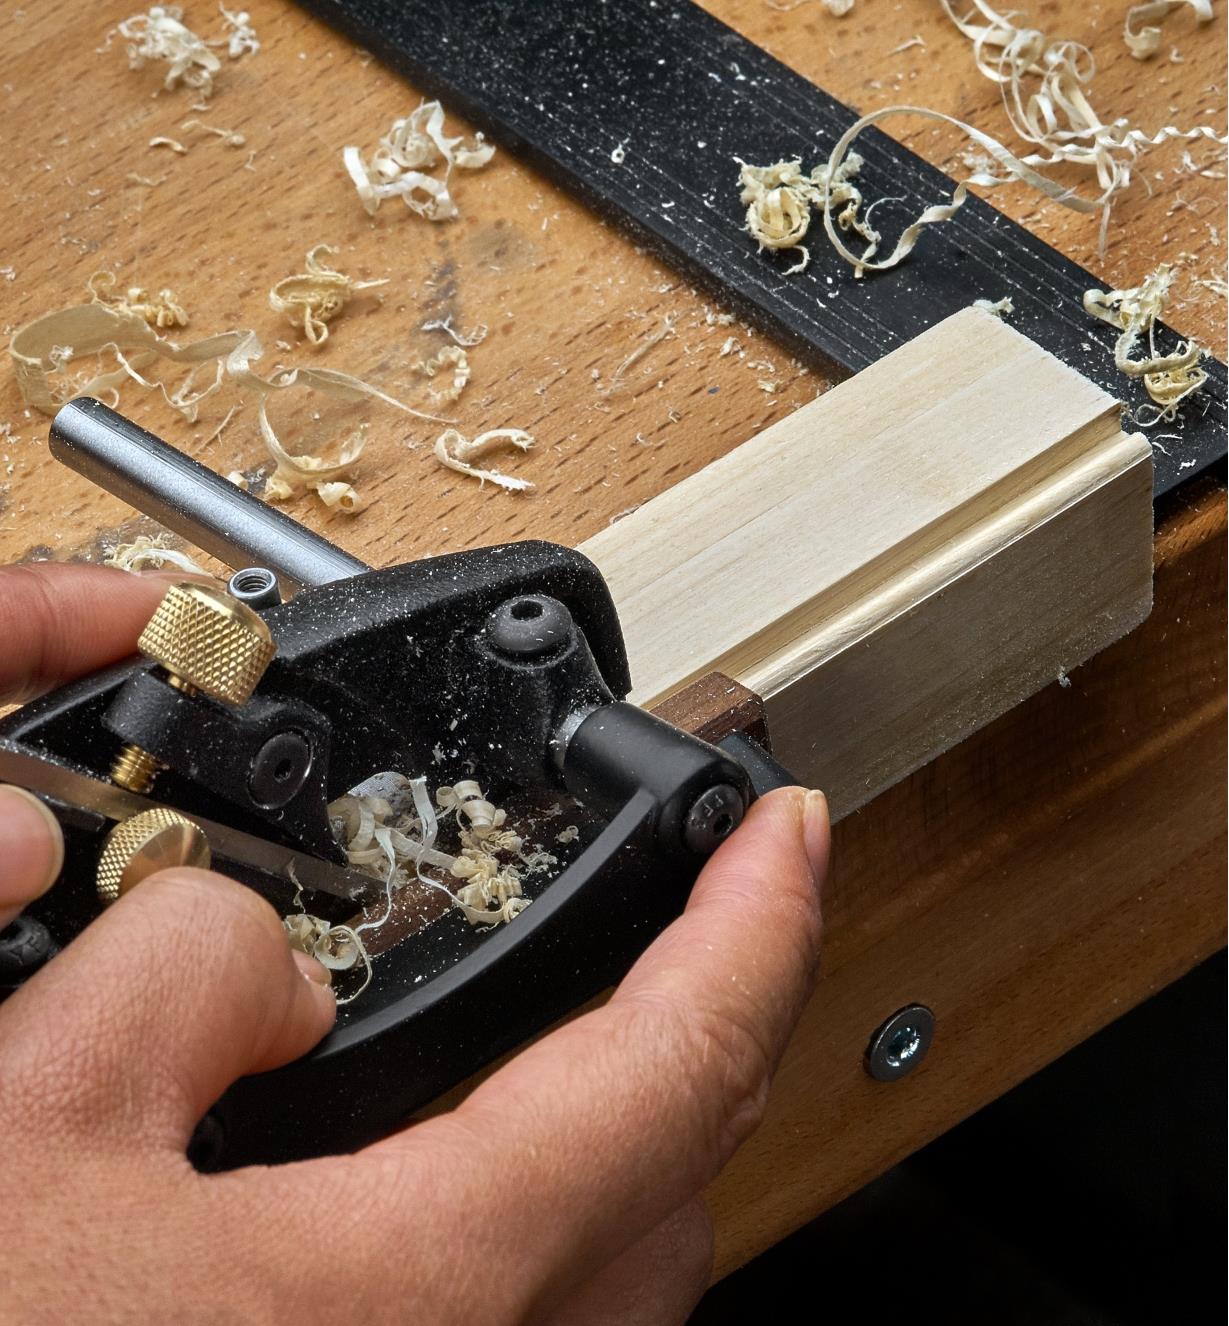 A left-hand box-maker’s plow plane being used to cut beading on the edge of a piece of wooden stock